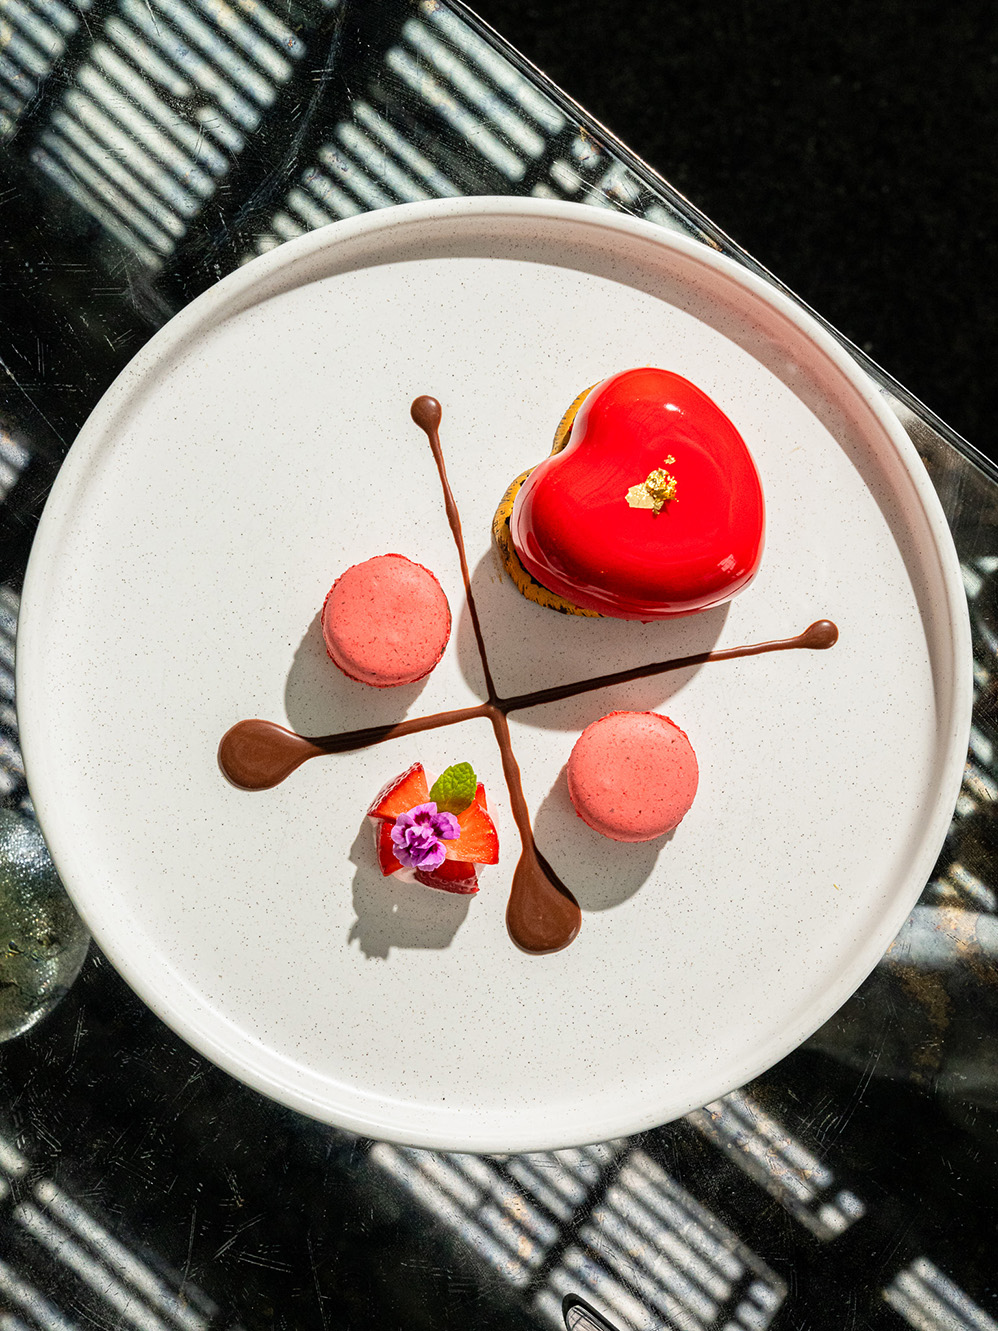 a dish with a macaron strawberries and a little cake with a heart shape